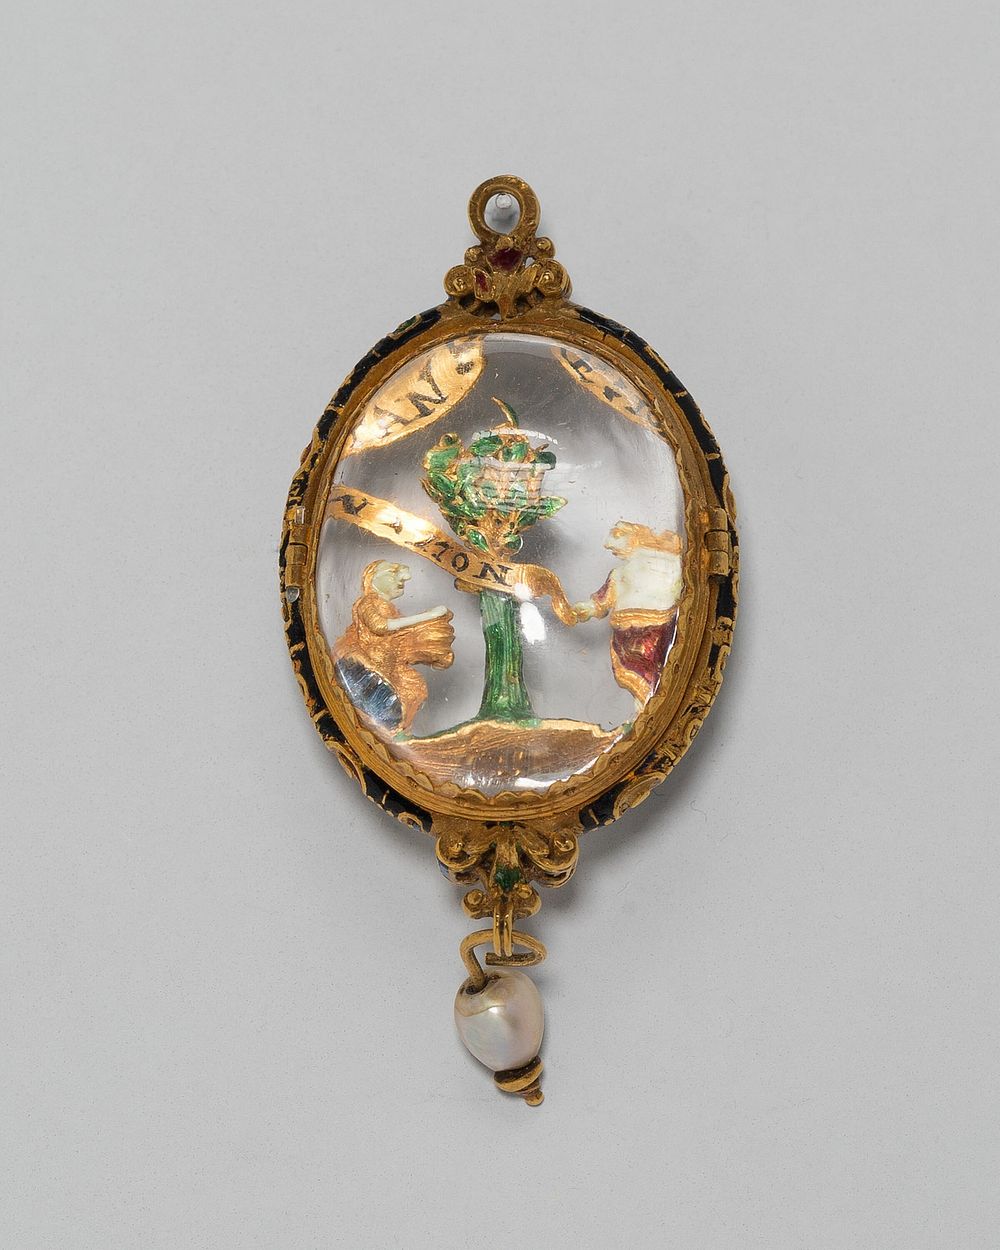 Pendant with Christ Appearing to Saint Mary Magdalene